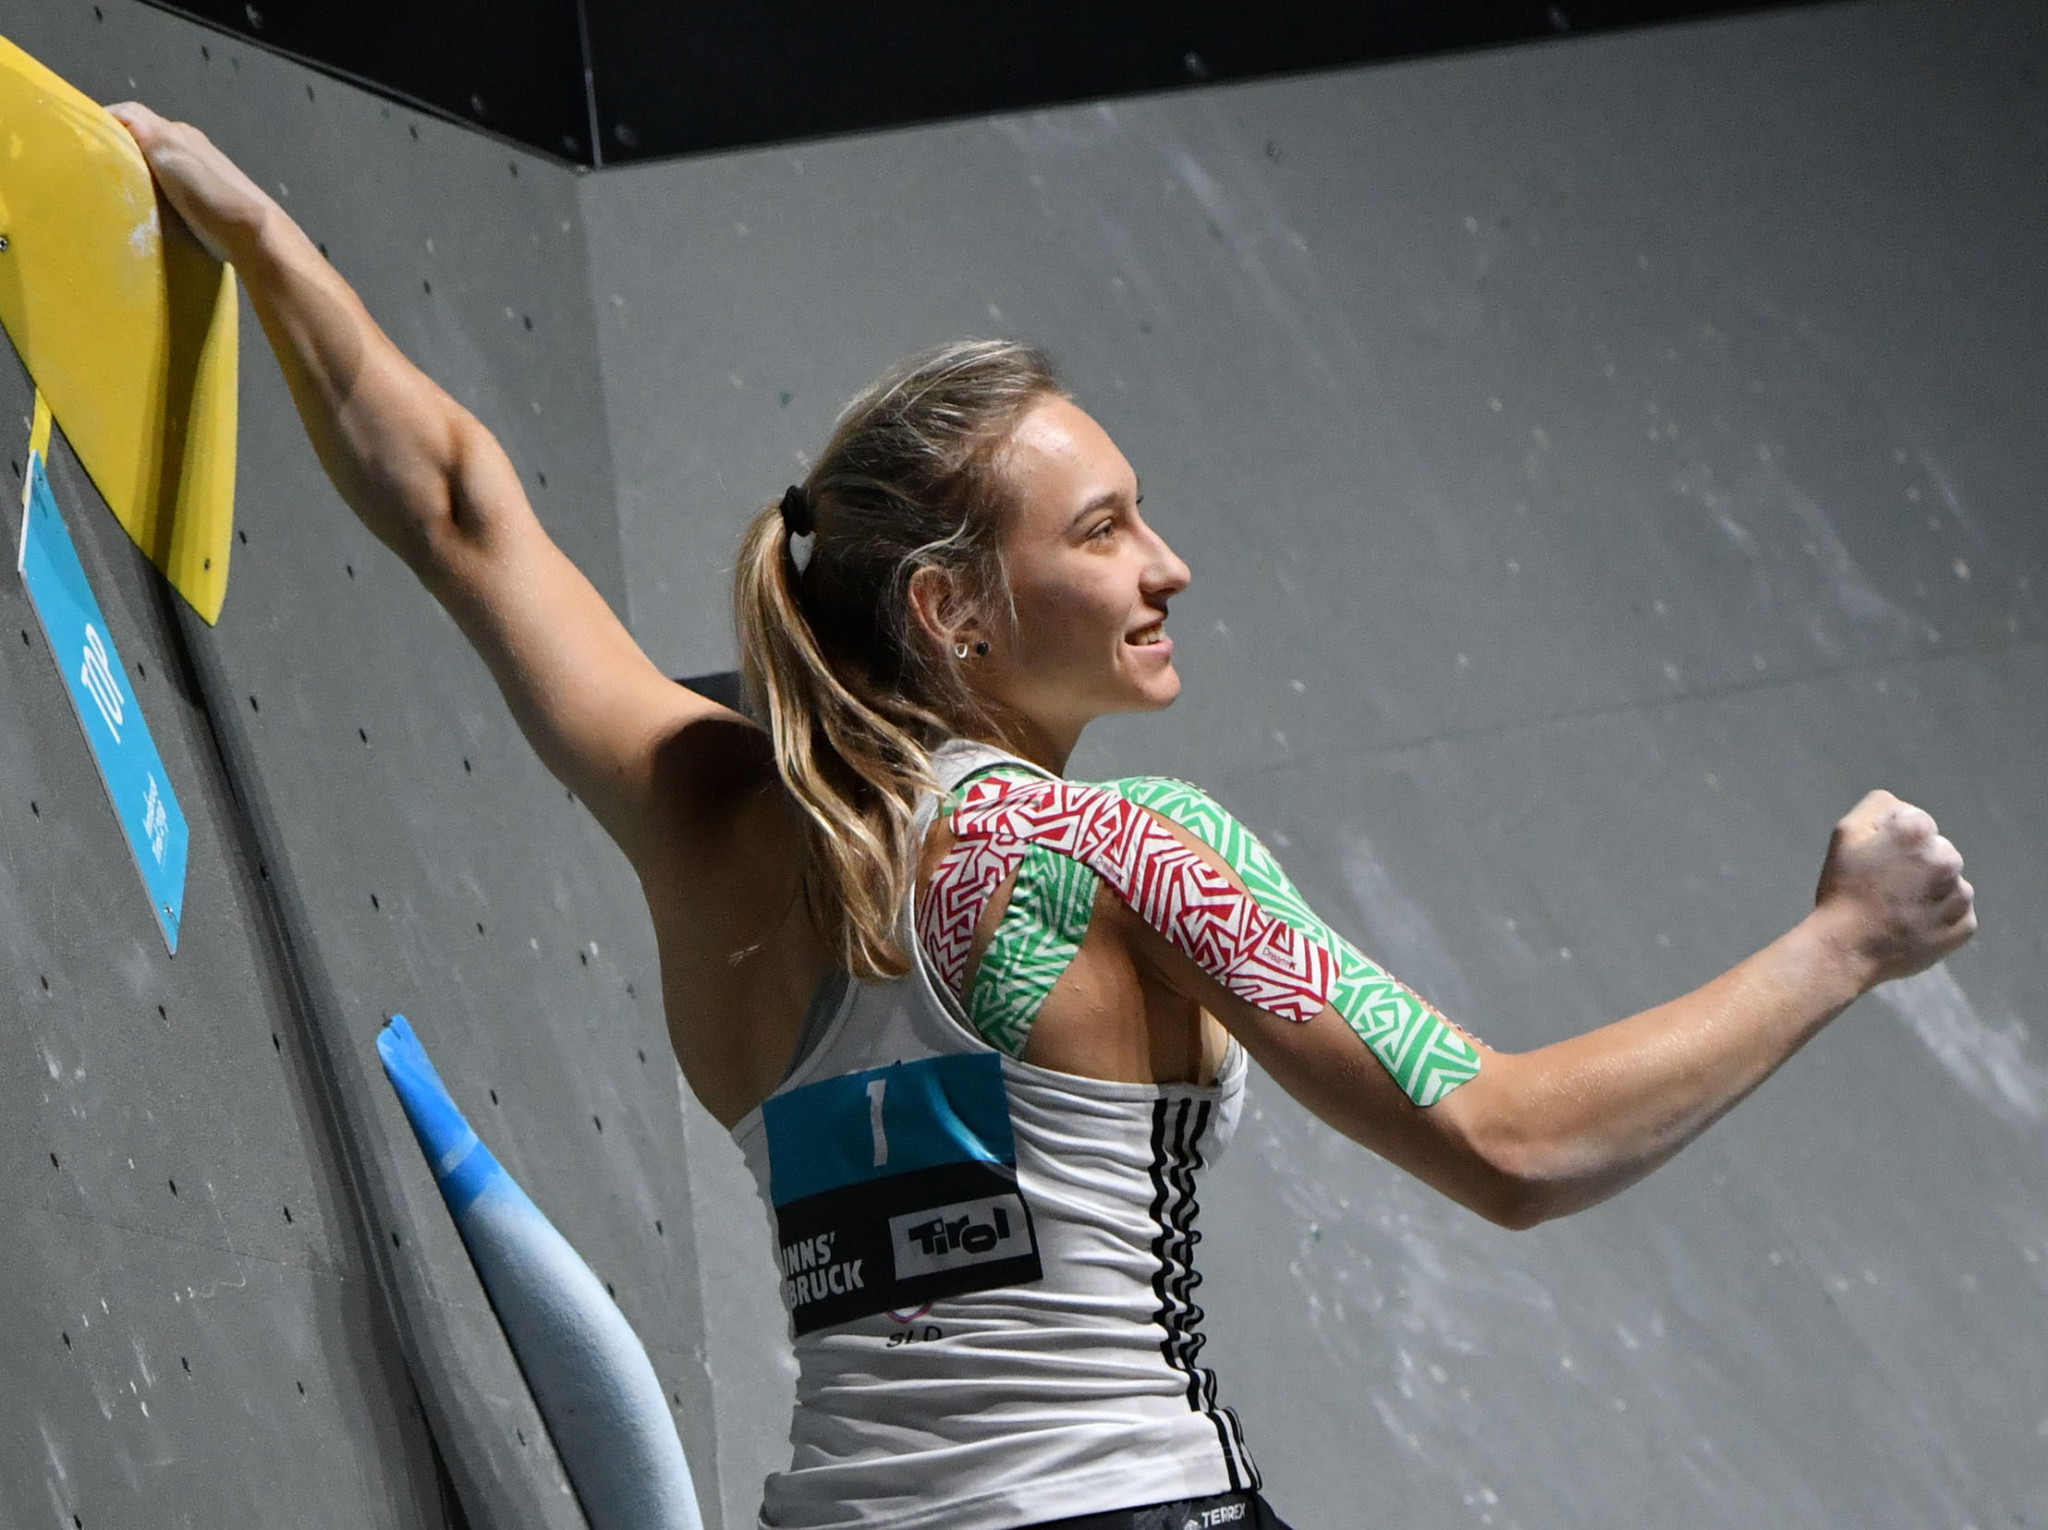 Slovenia's Janja Garnbret won the women's bouldering event at the IFSC Climbing World Cup ©Getty Images